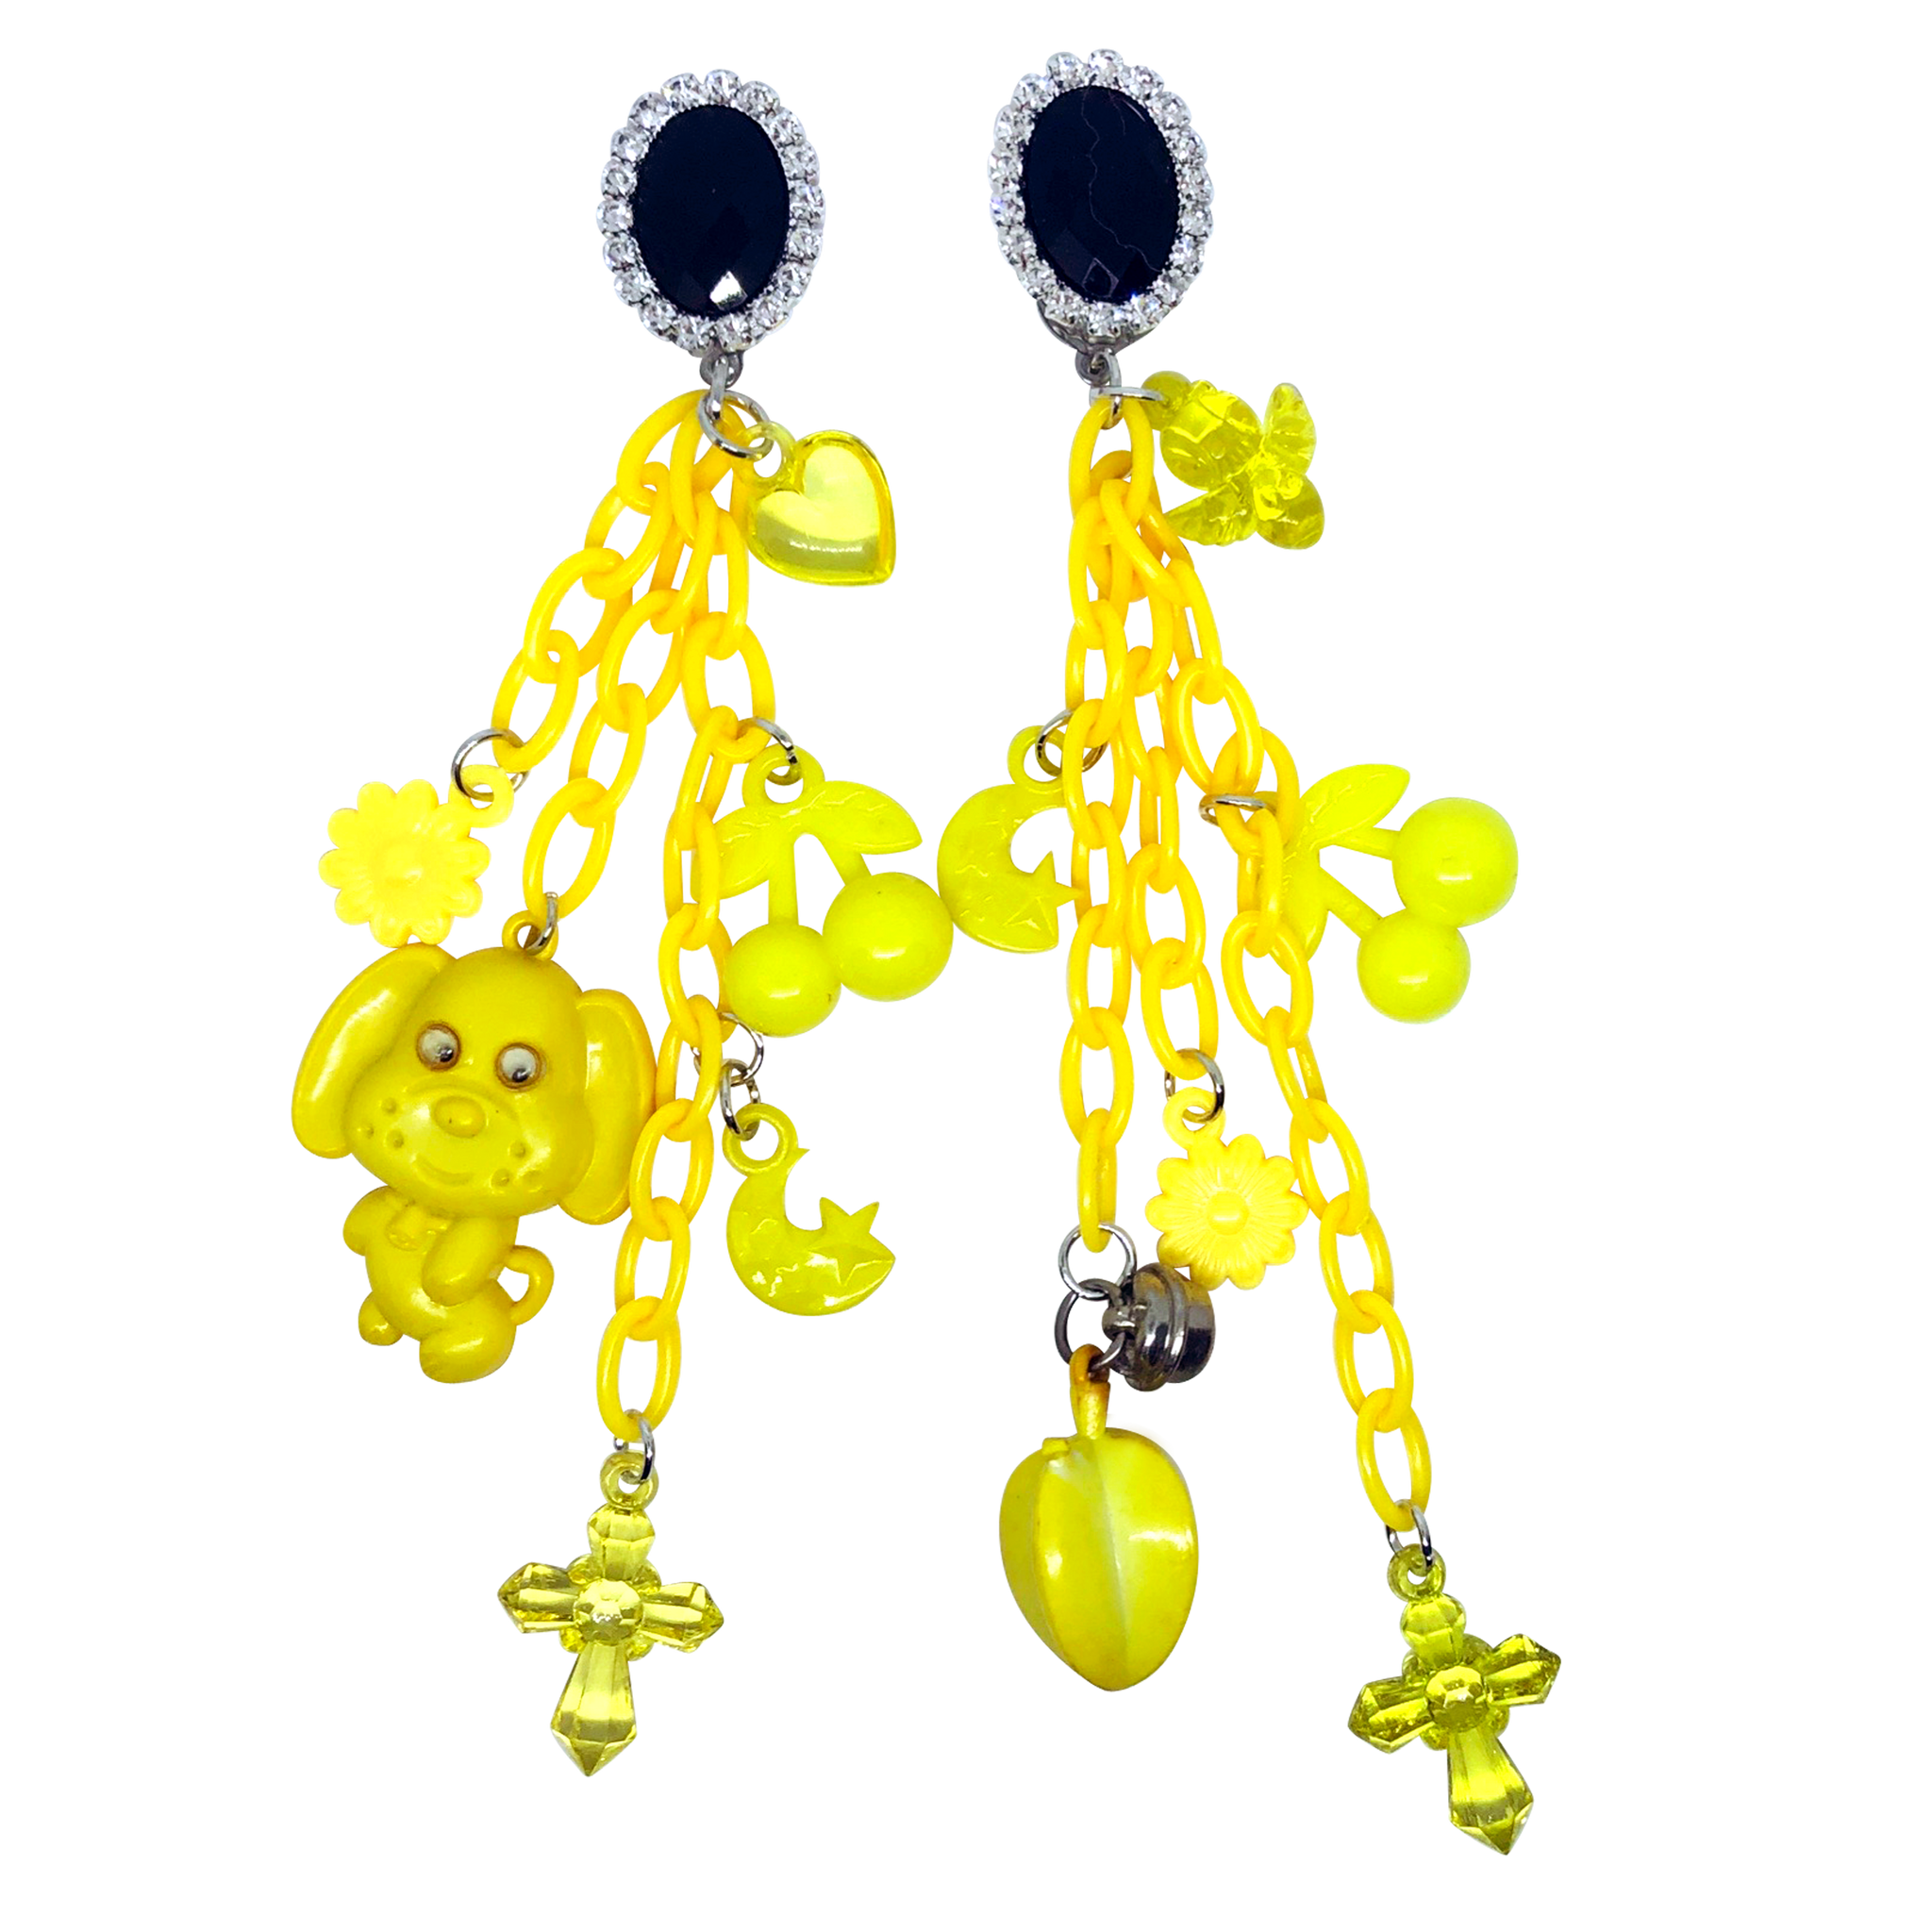 Vintage Black And Yellow Charm Earrings (4388169416787)